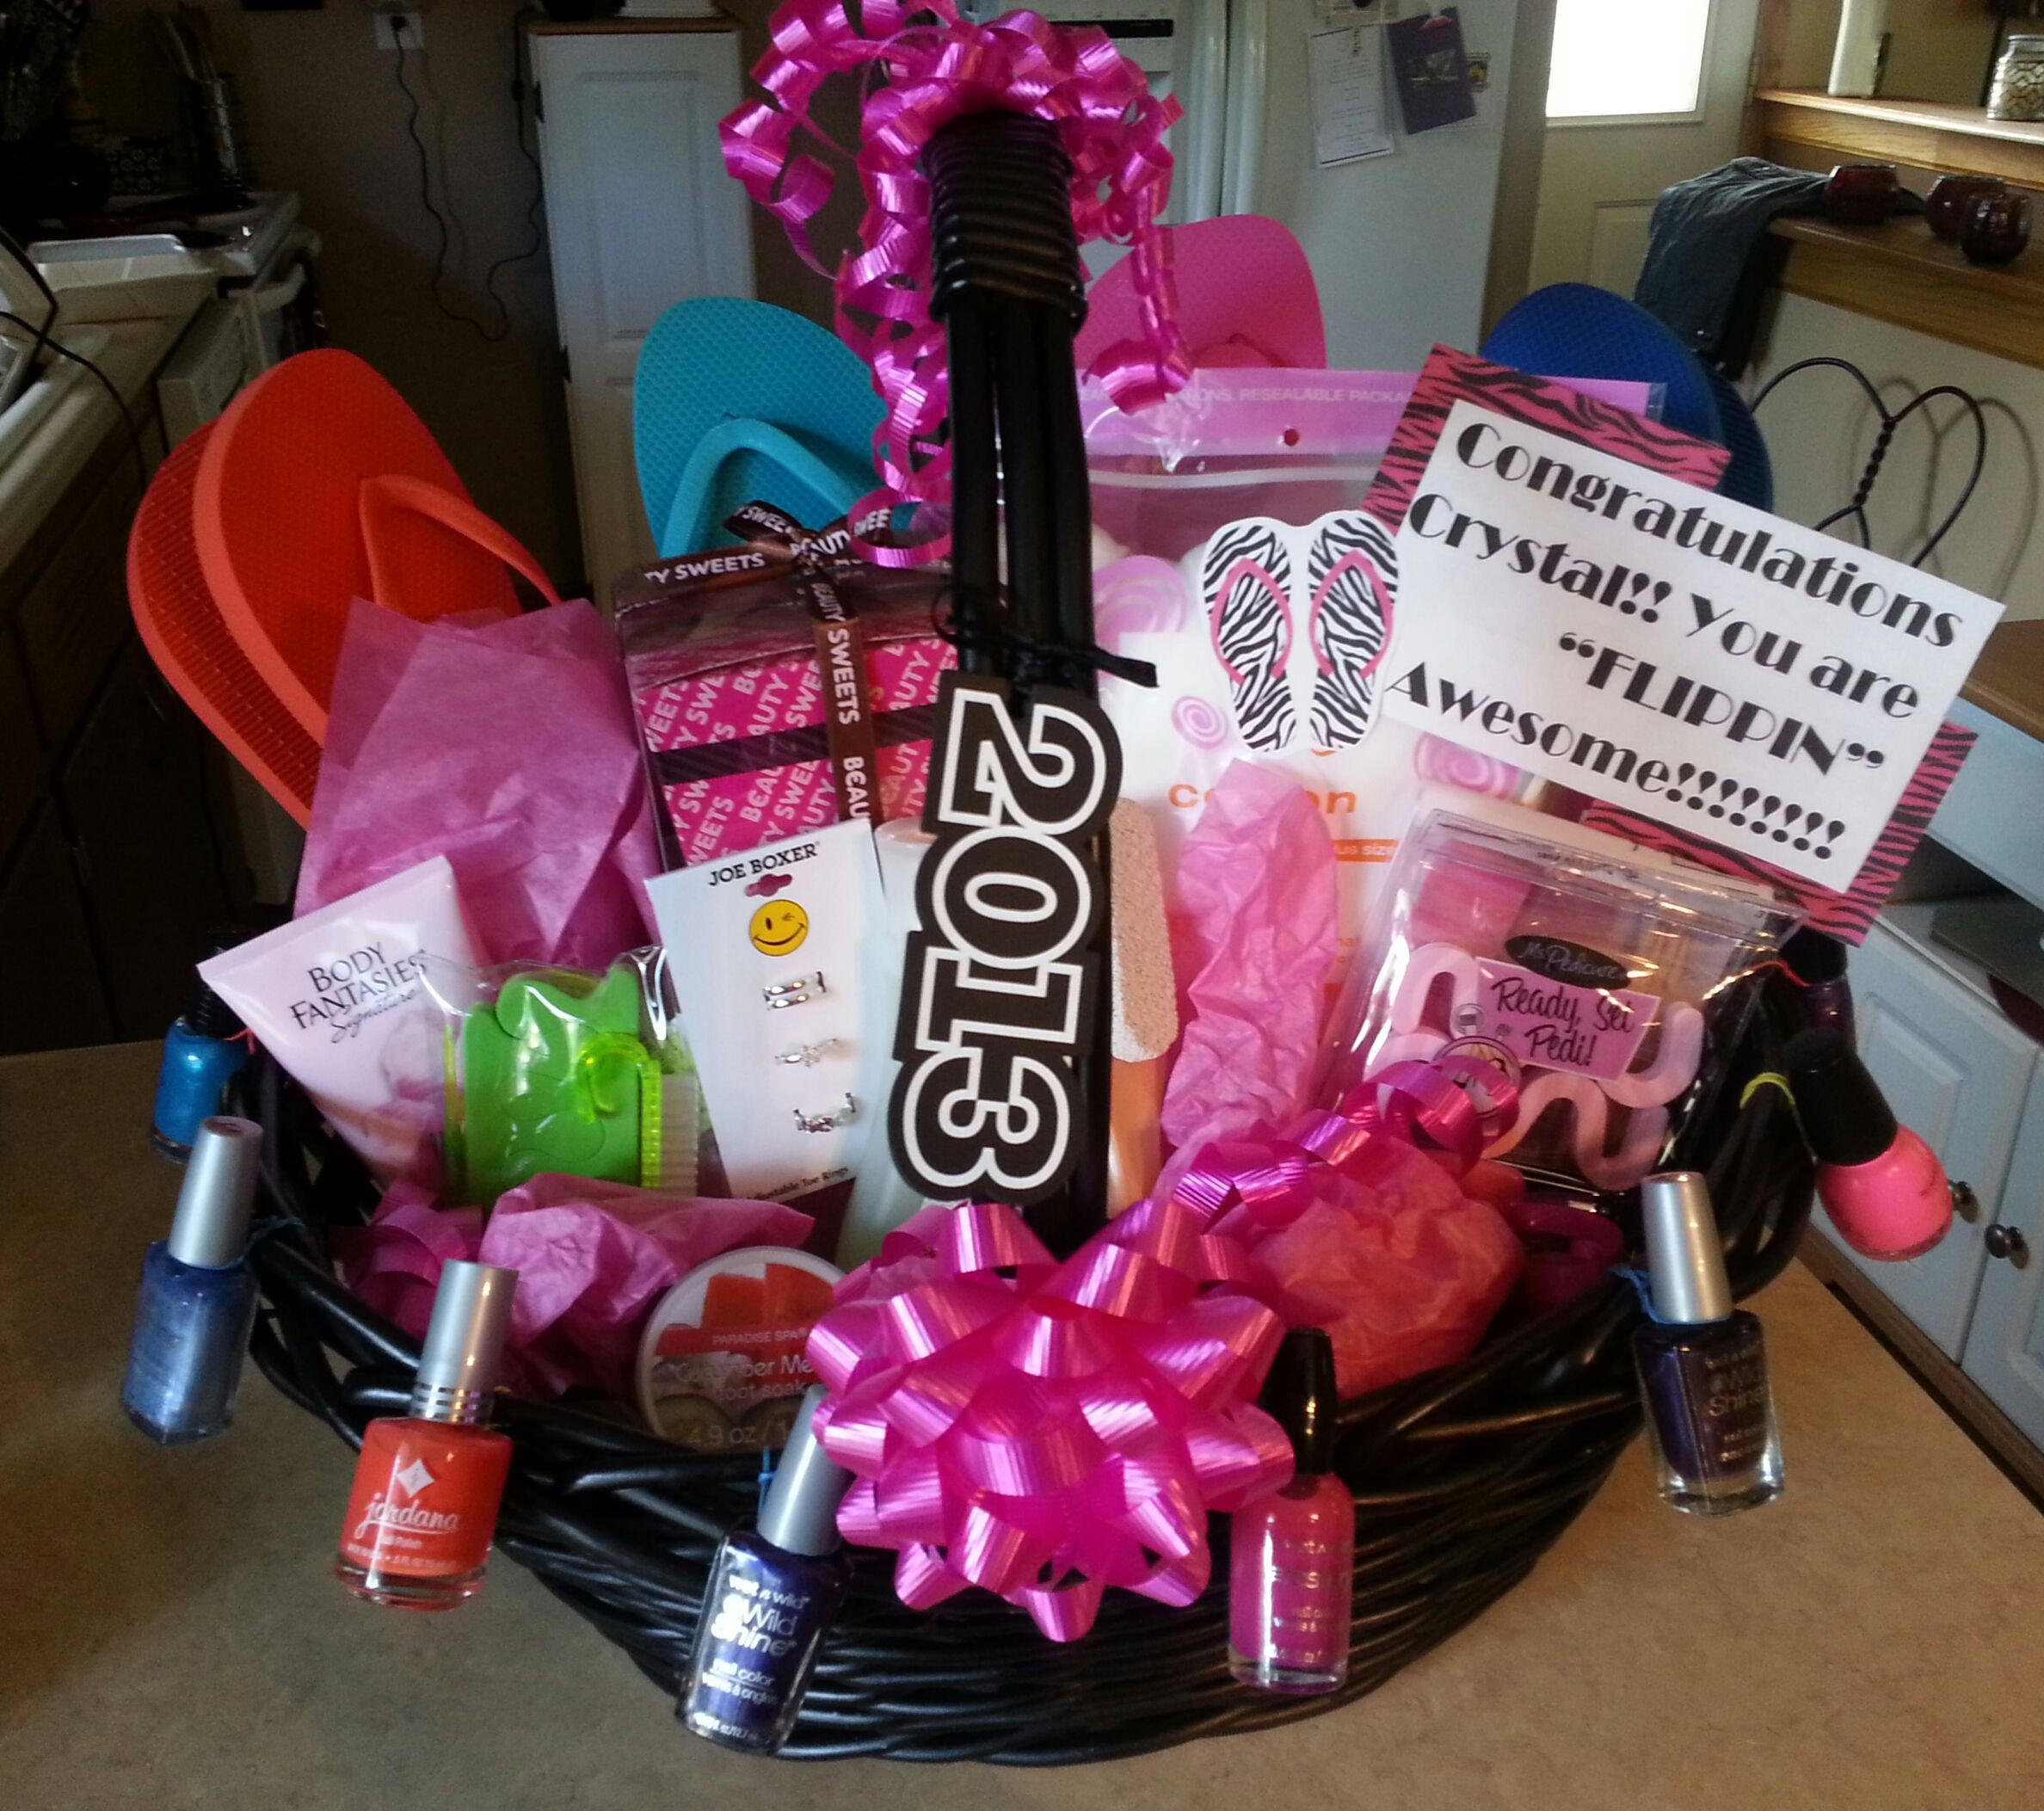 High School Graduation Gift Ideas For Girls
 Great Graduation Gift for a girl Made this one for my